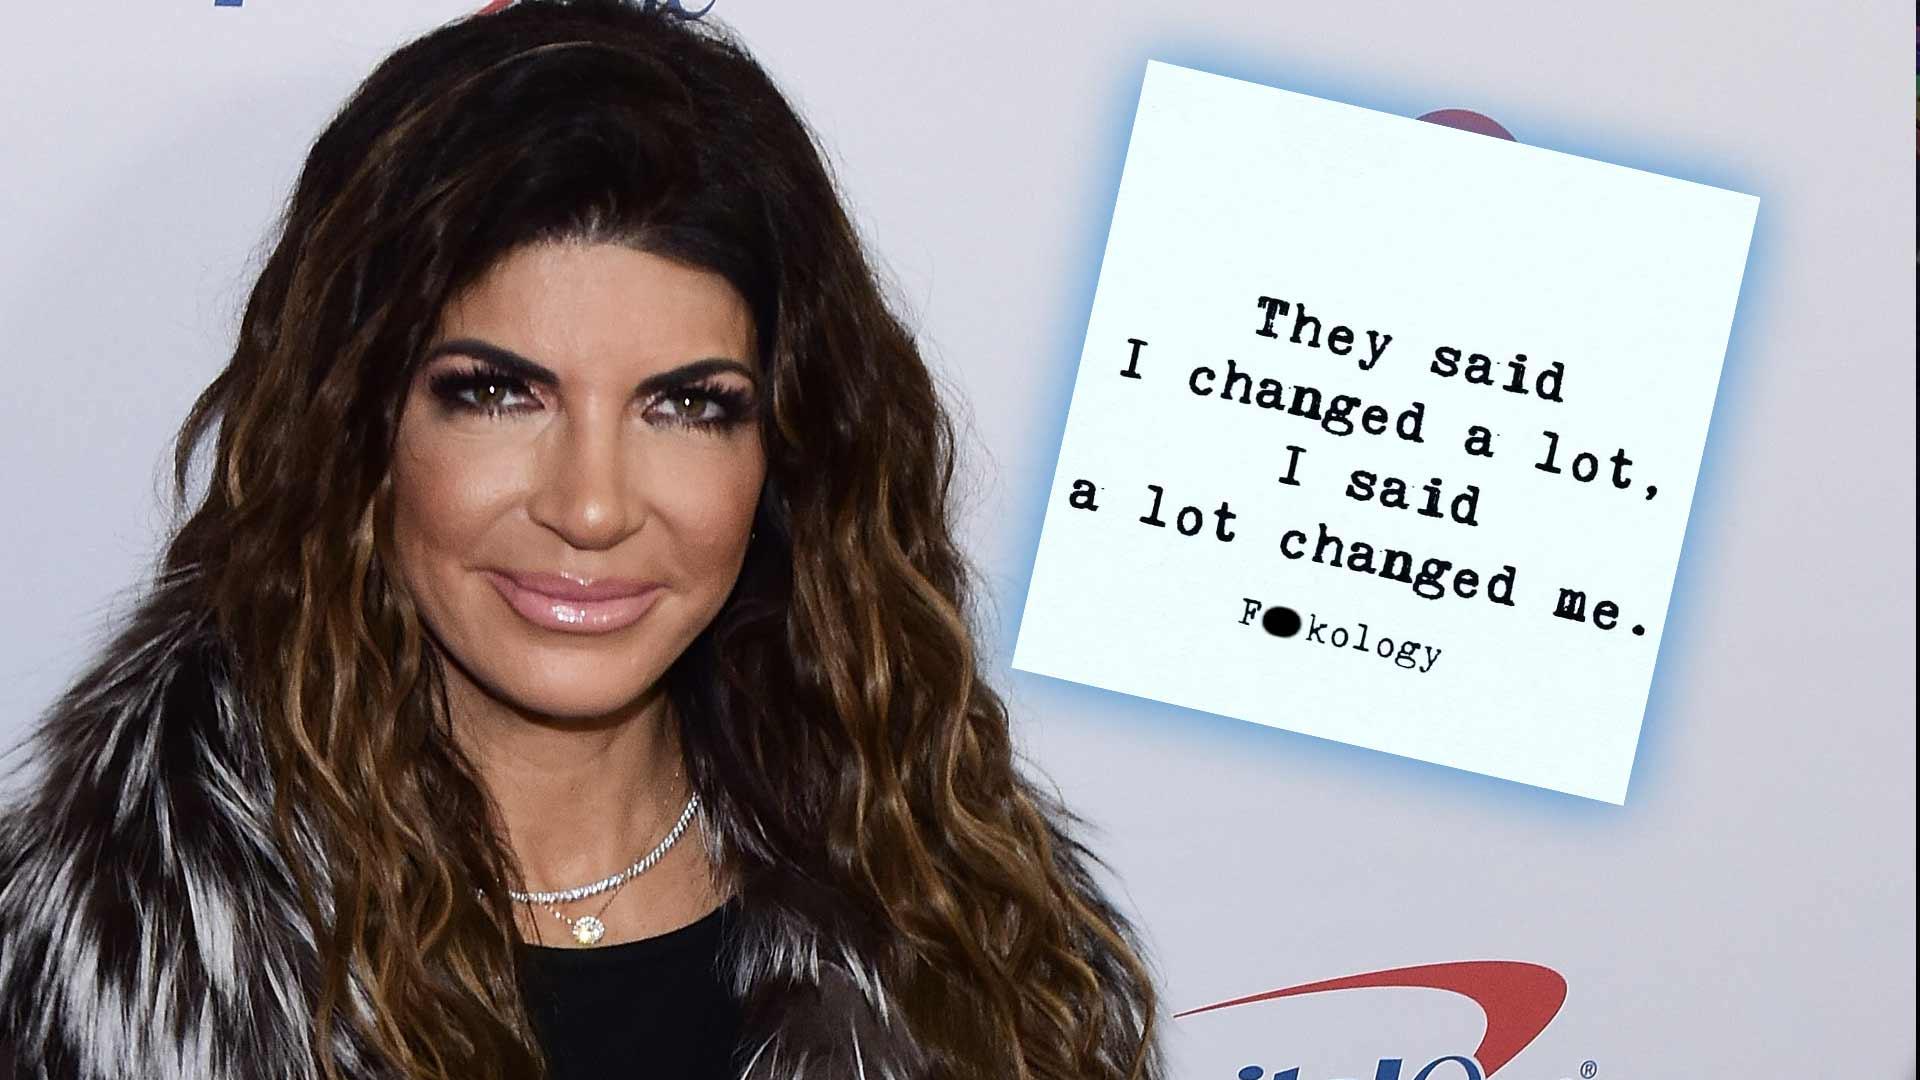 Teresa Giudice Shares Cryptic Message While Her Girls Visit Joe In Italy